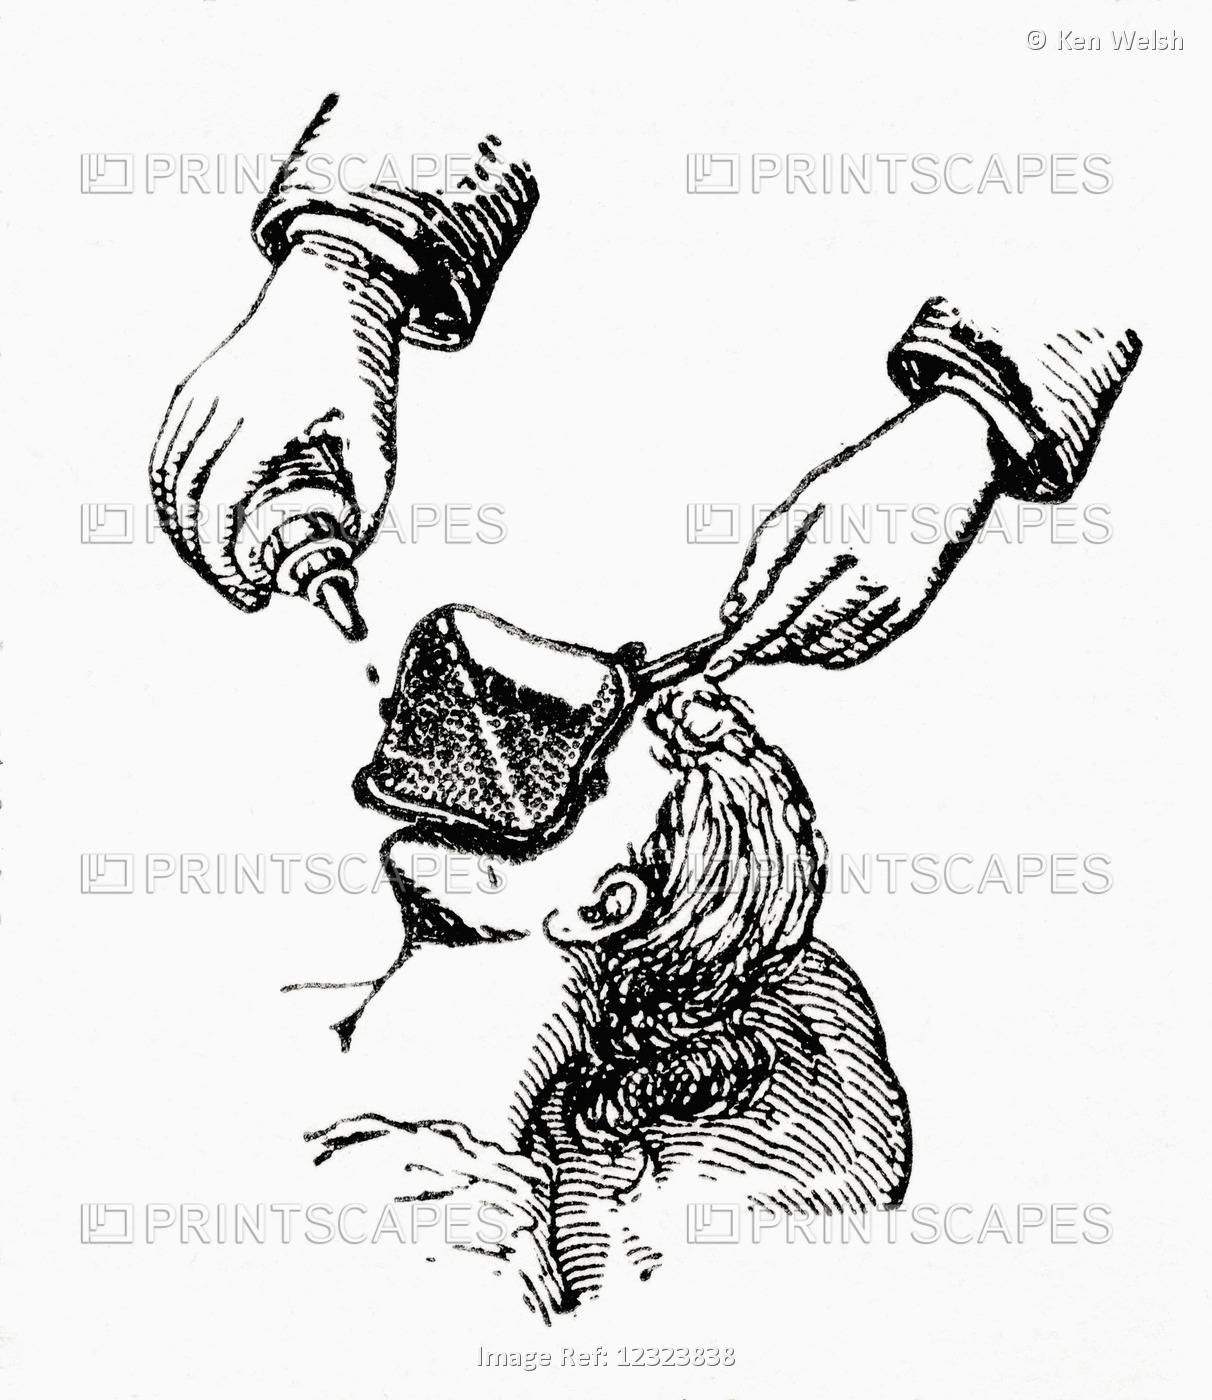 Anaesthetizing A Patient In The Late 19th Century By Dripping Chloroform Onto A ...